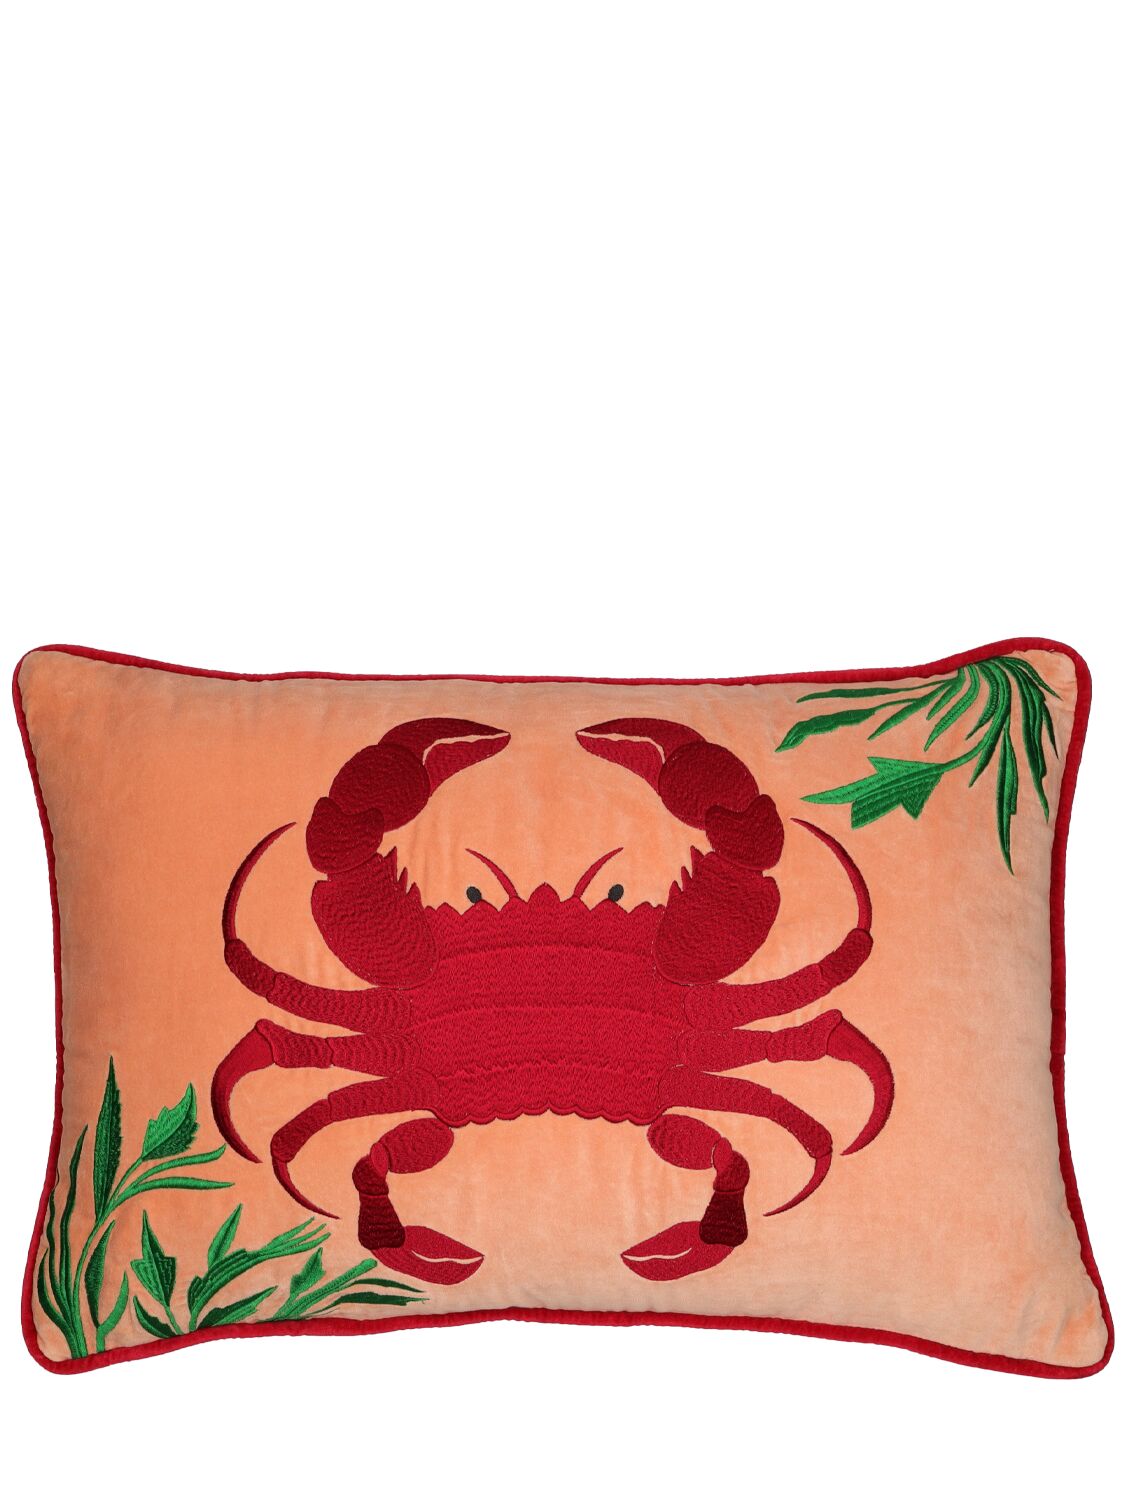 Image of Hand-embroidered Cotton Velvet Cushion